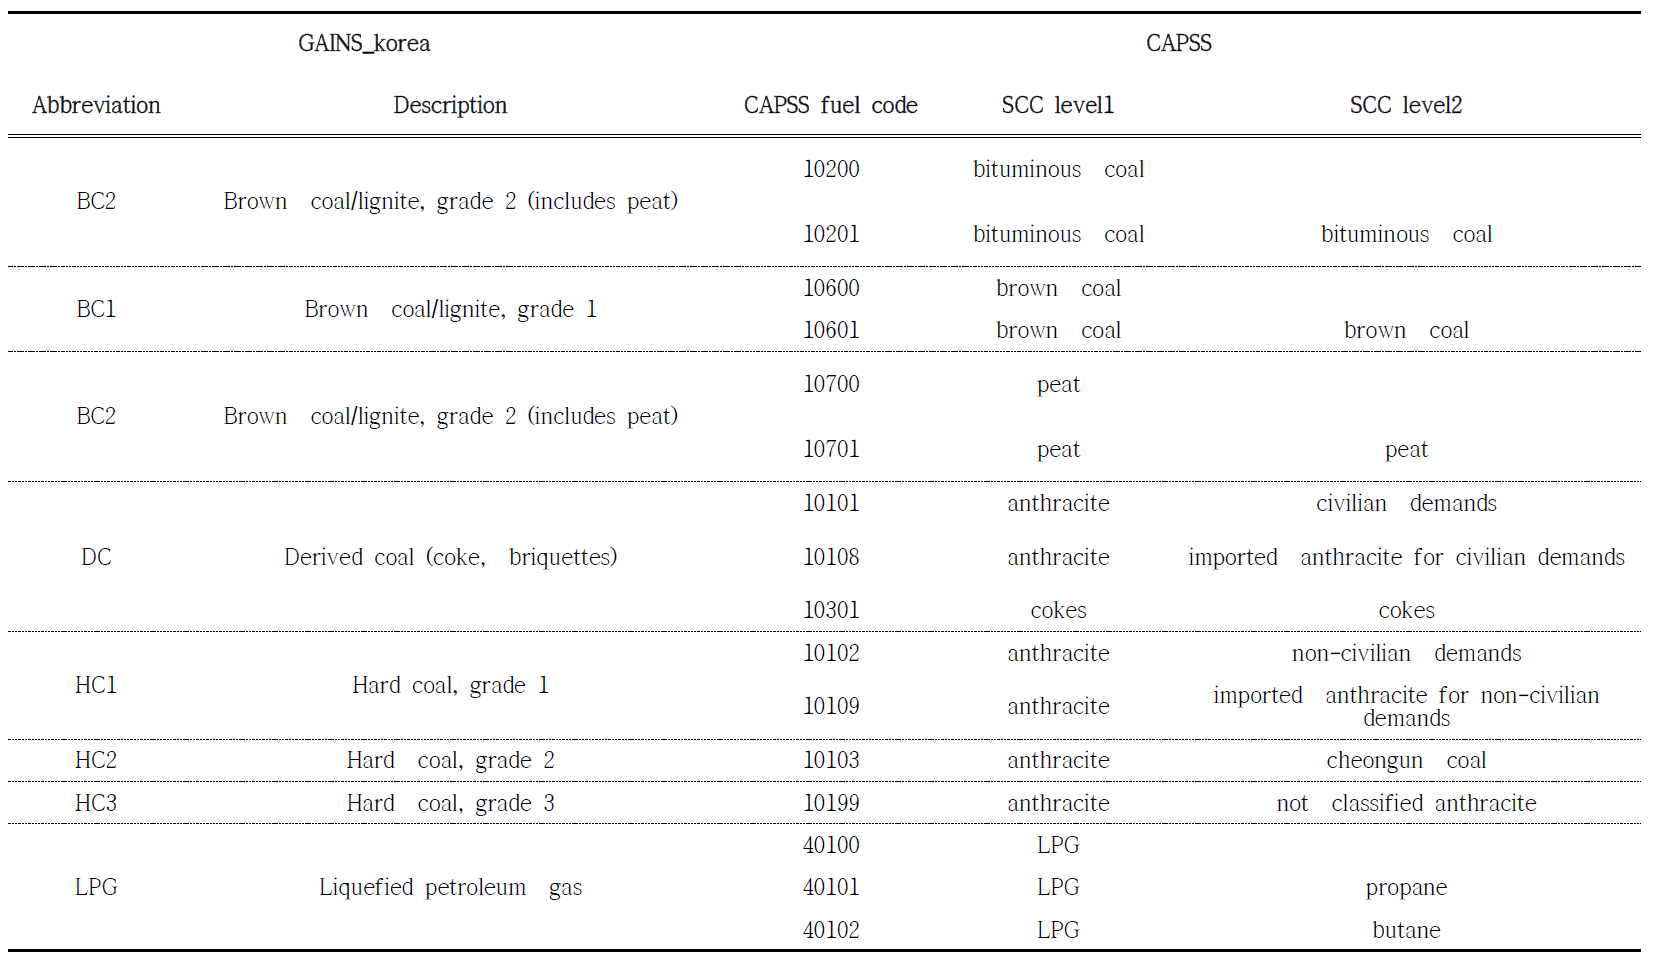 Example of fuel code mapping table between CAPSS and GAINS_korea